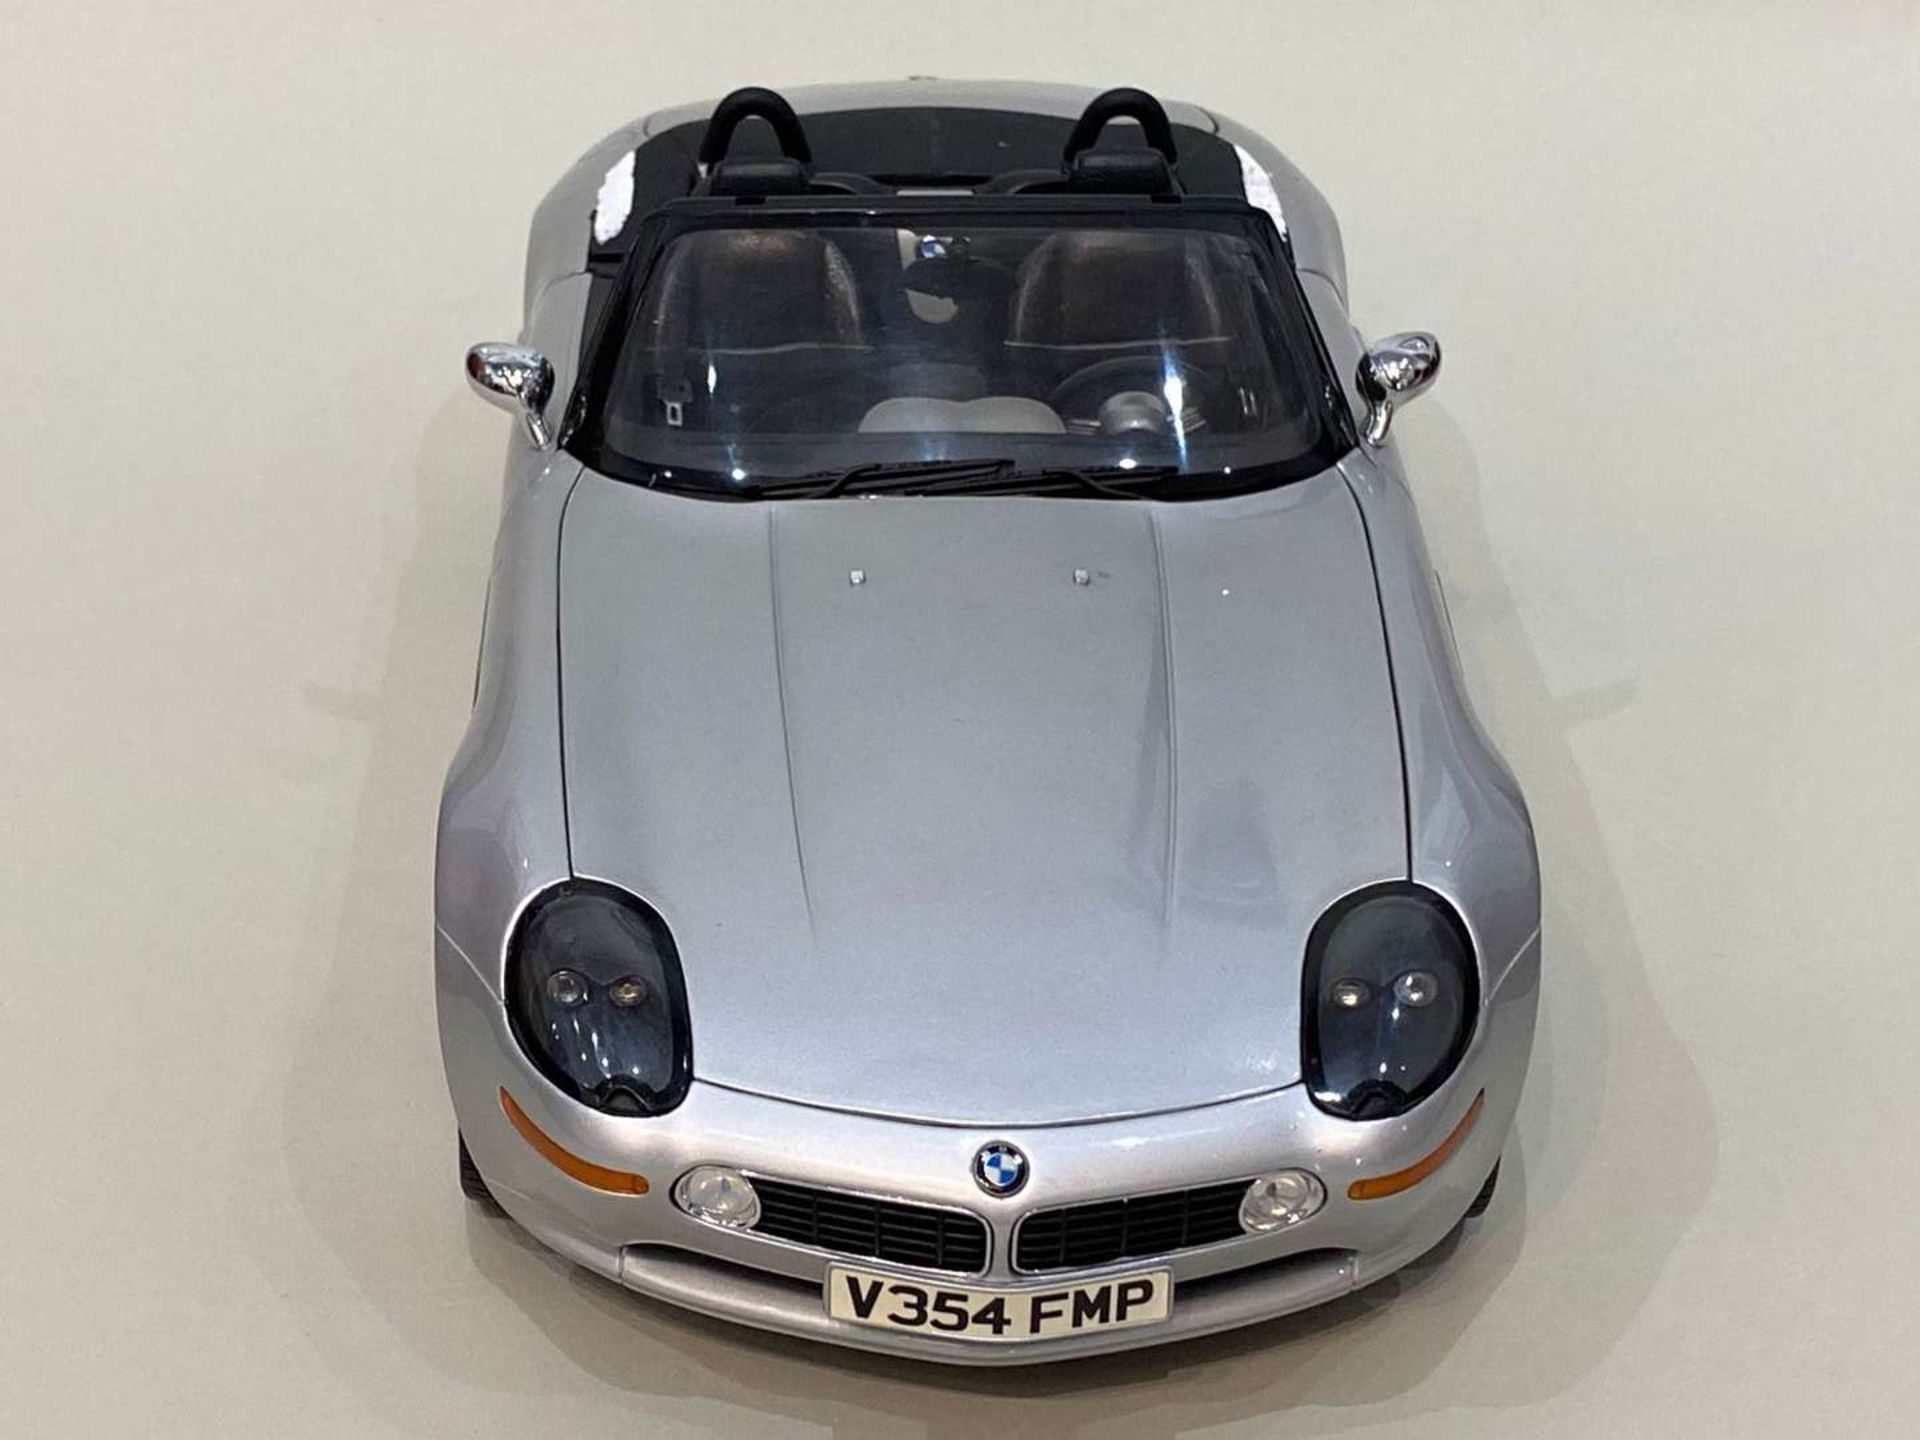 KYOSHO, BMW Z8, James Bond, 007, "The World is Not Enough" 1:12 - Image 3 of 7